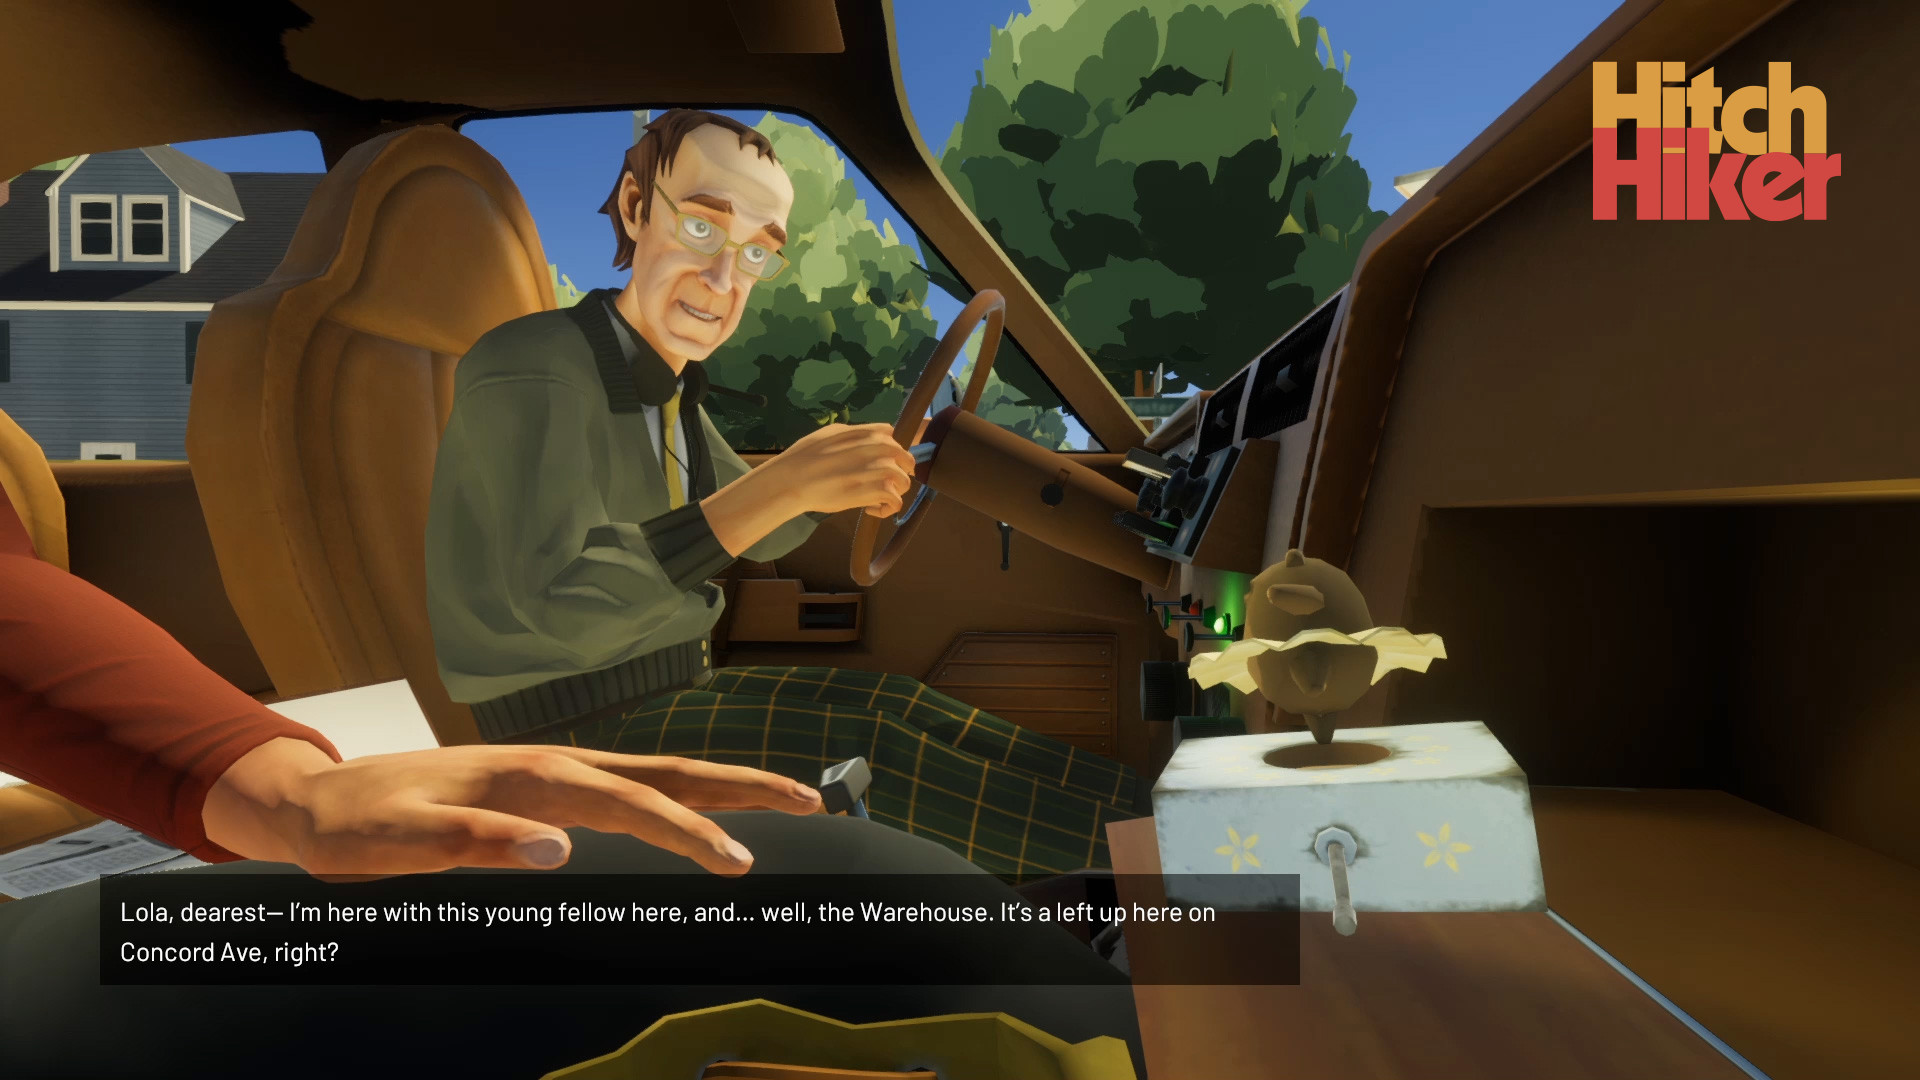 Hitchhiker - A Mystery Game Steam CD Key